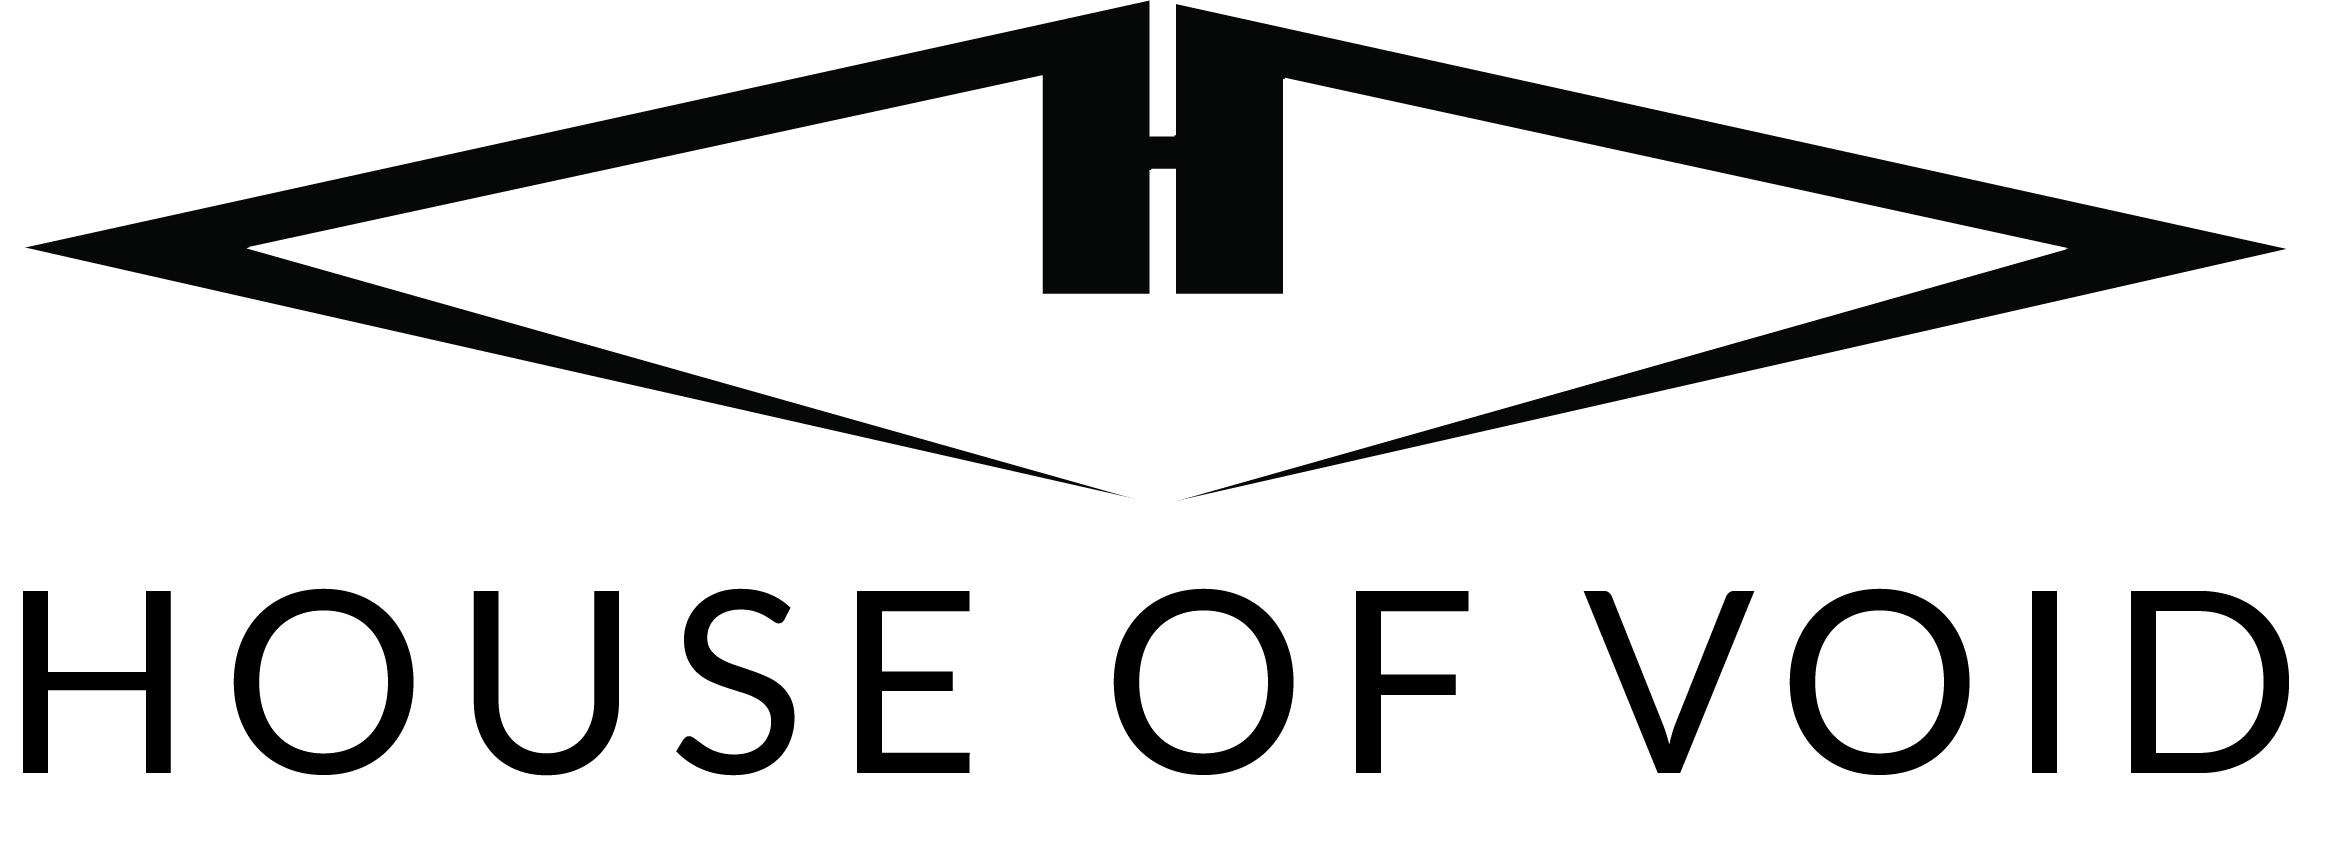 The House of Void Logo